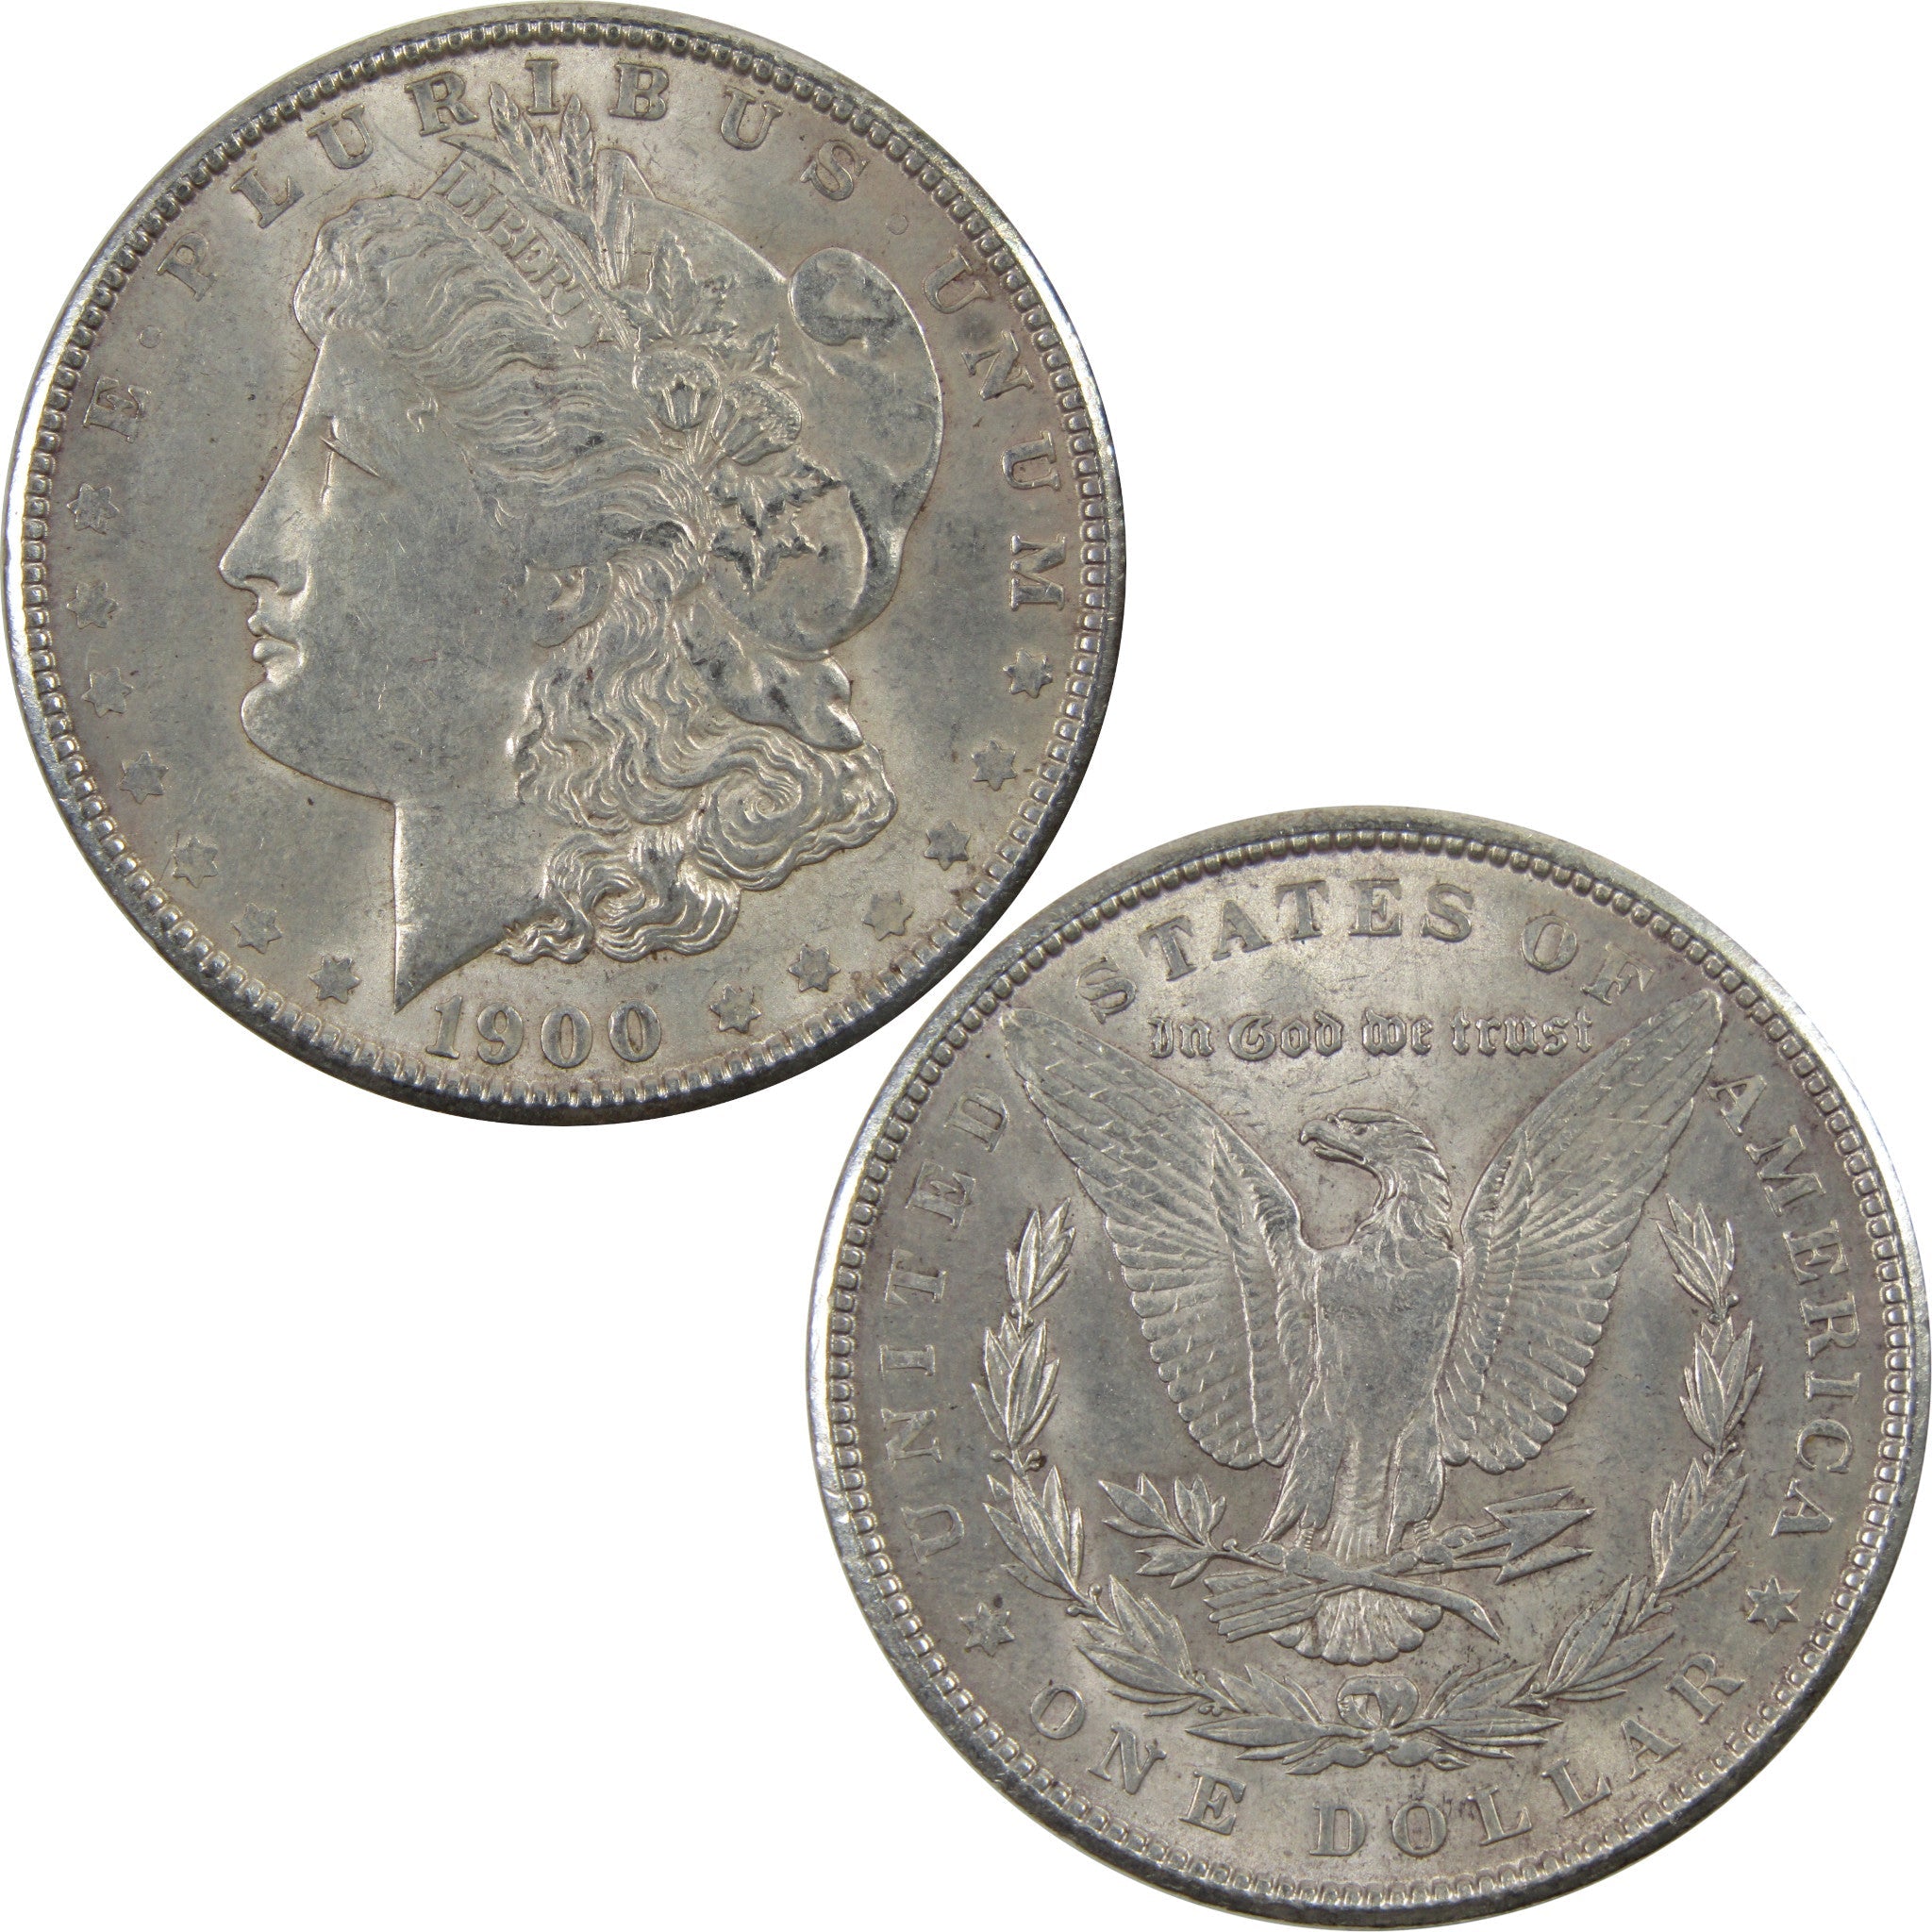 1900 Morgan Dollar AU About Uncirculated 90% Silver $1 Coin SKU:I5473 - Morgan coin - Morgan silver dollar - Morgan silver dollar for sale - Profile Coins &amp; Collectibles